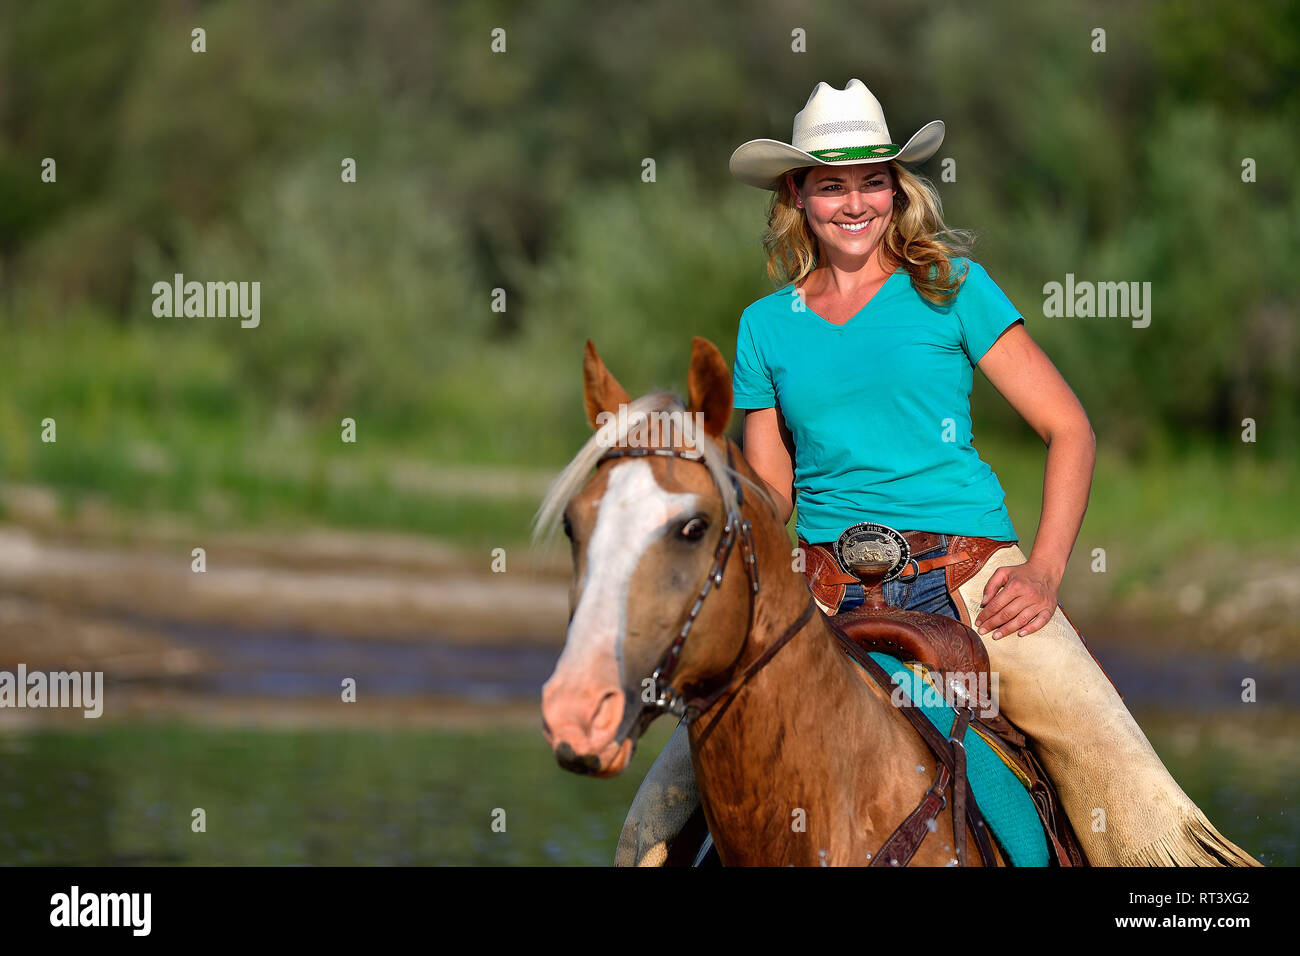 Blonde Cowgirl Riding